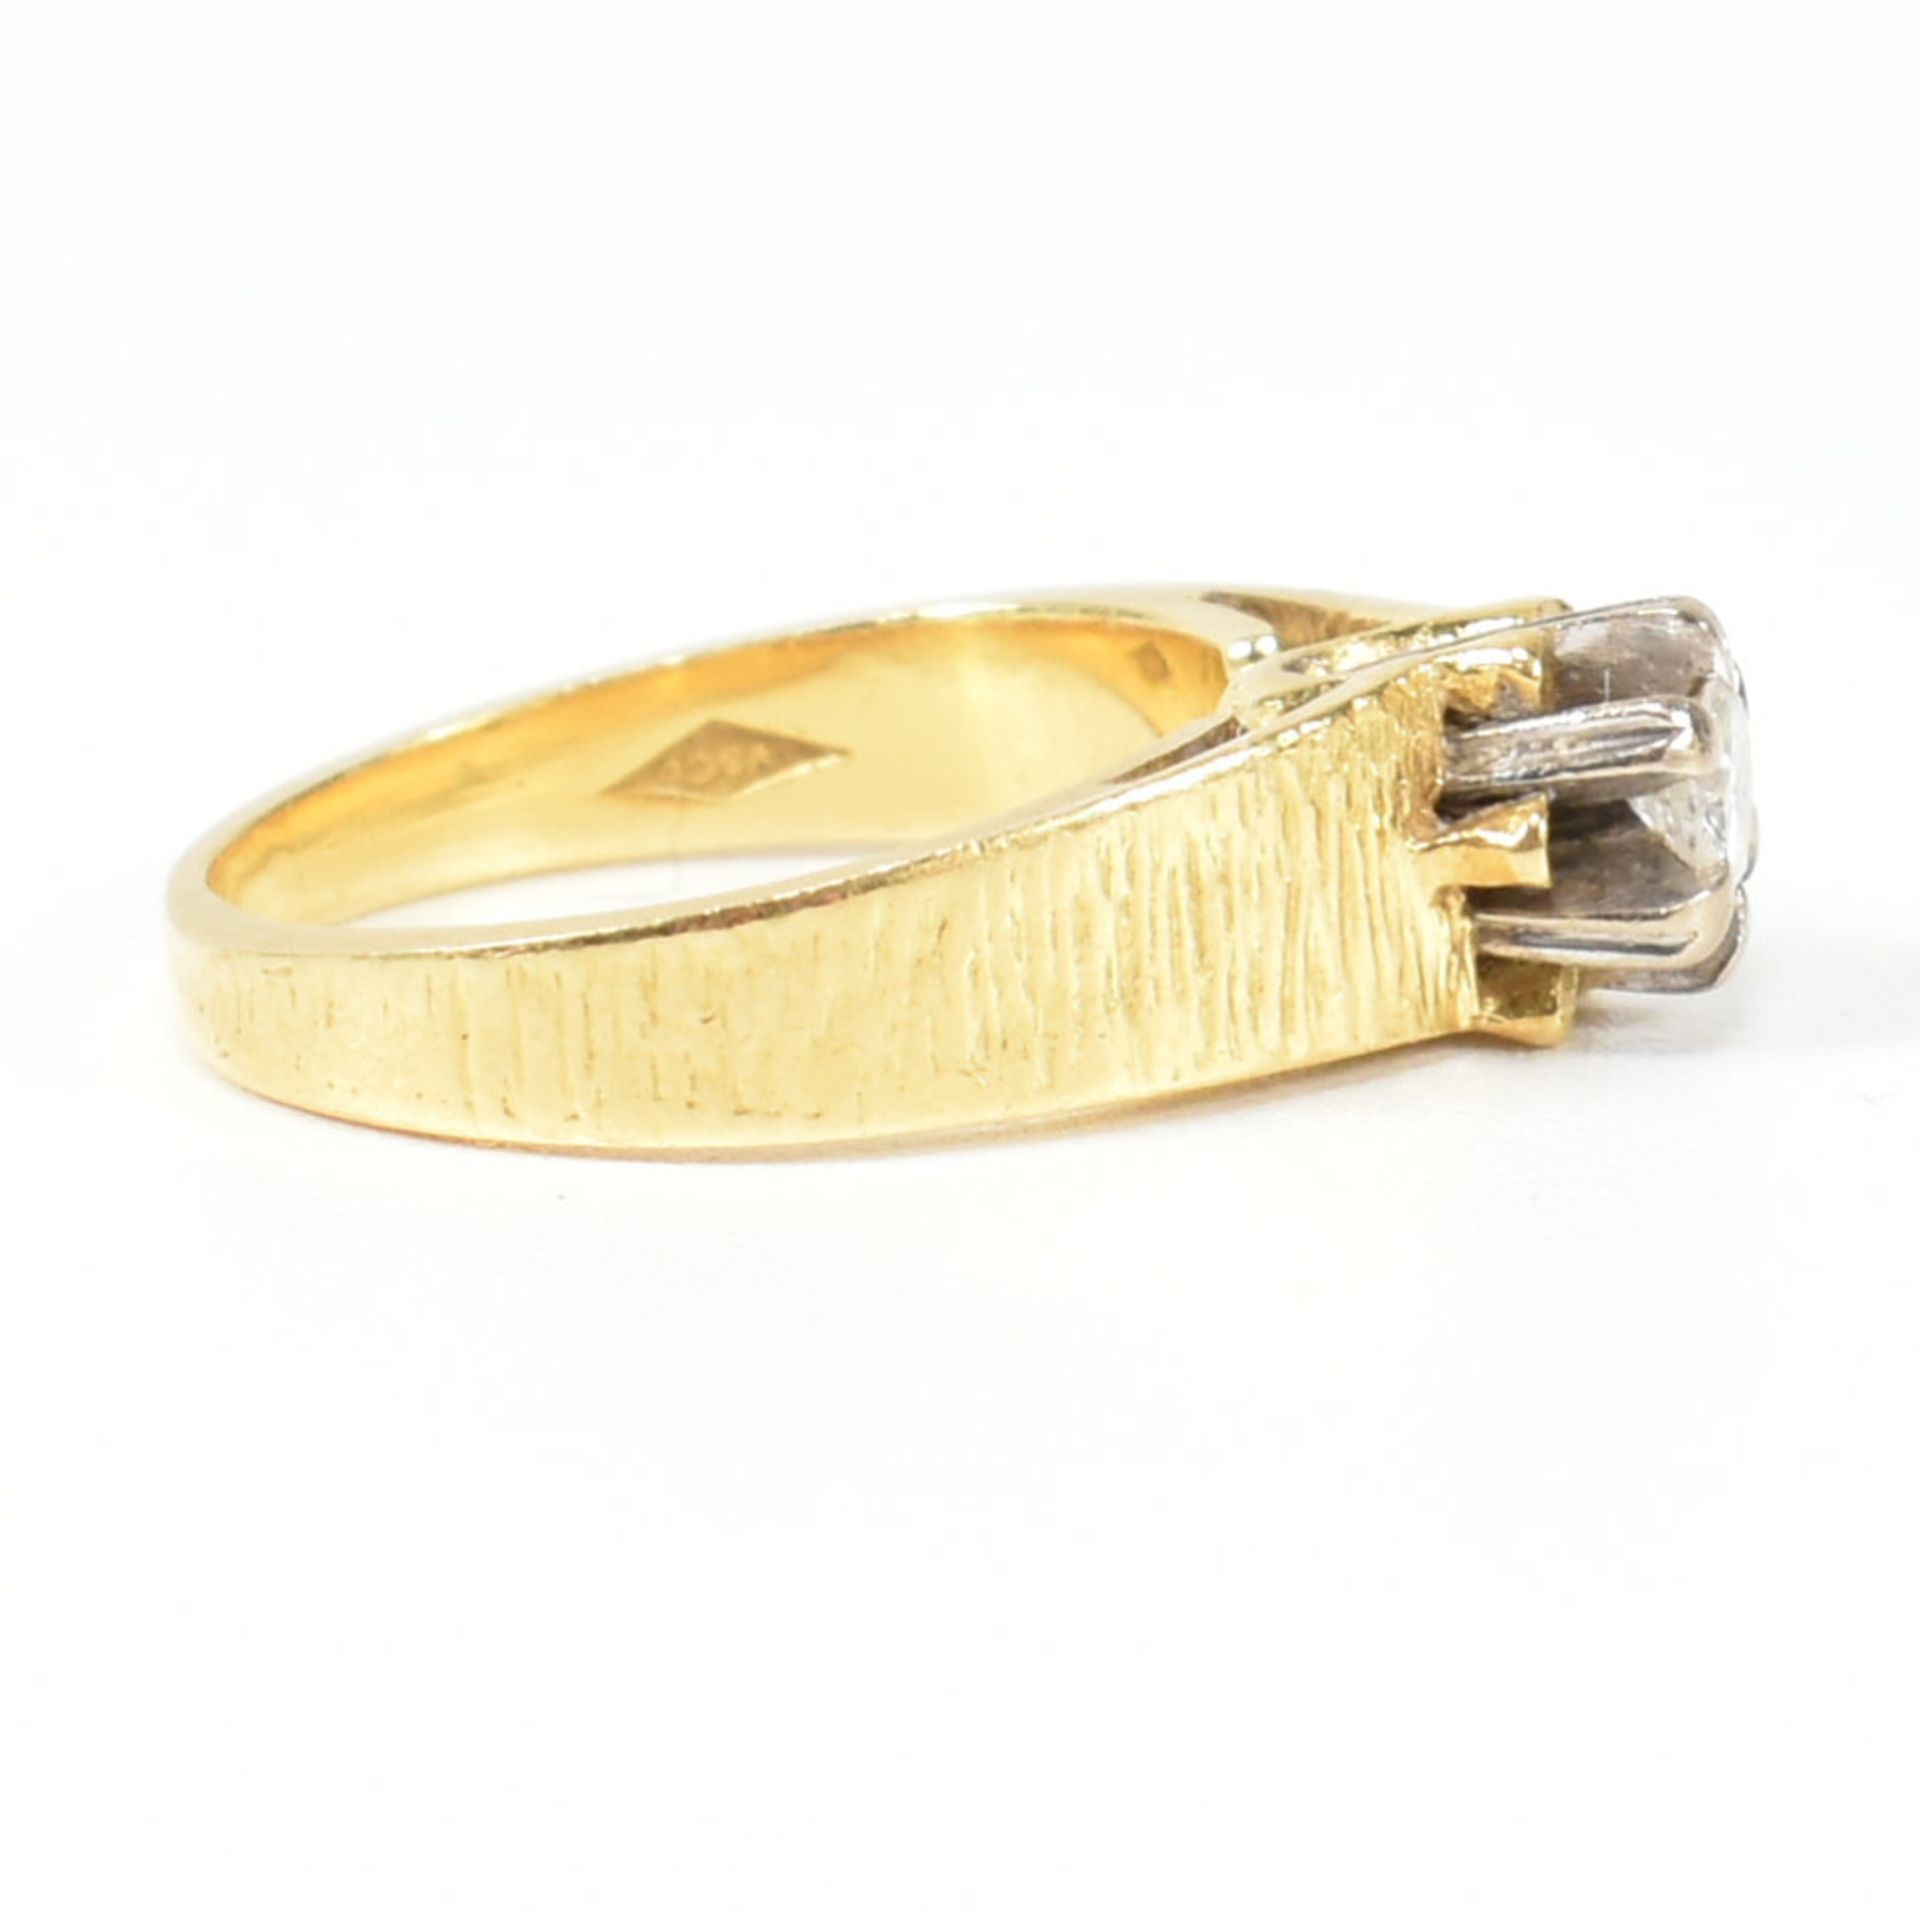 HALLMARKED 18CT GOLD & DIAMOND SOLITAIRE RING - Image 2 of 8